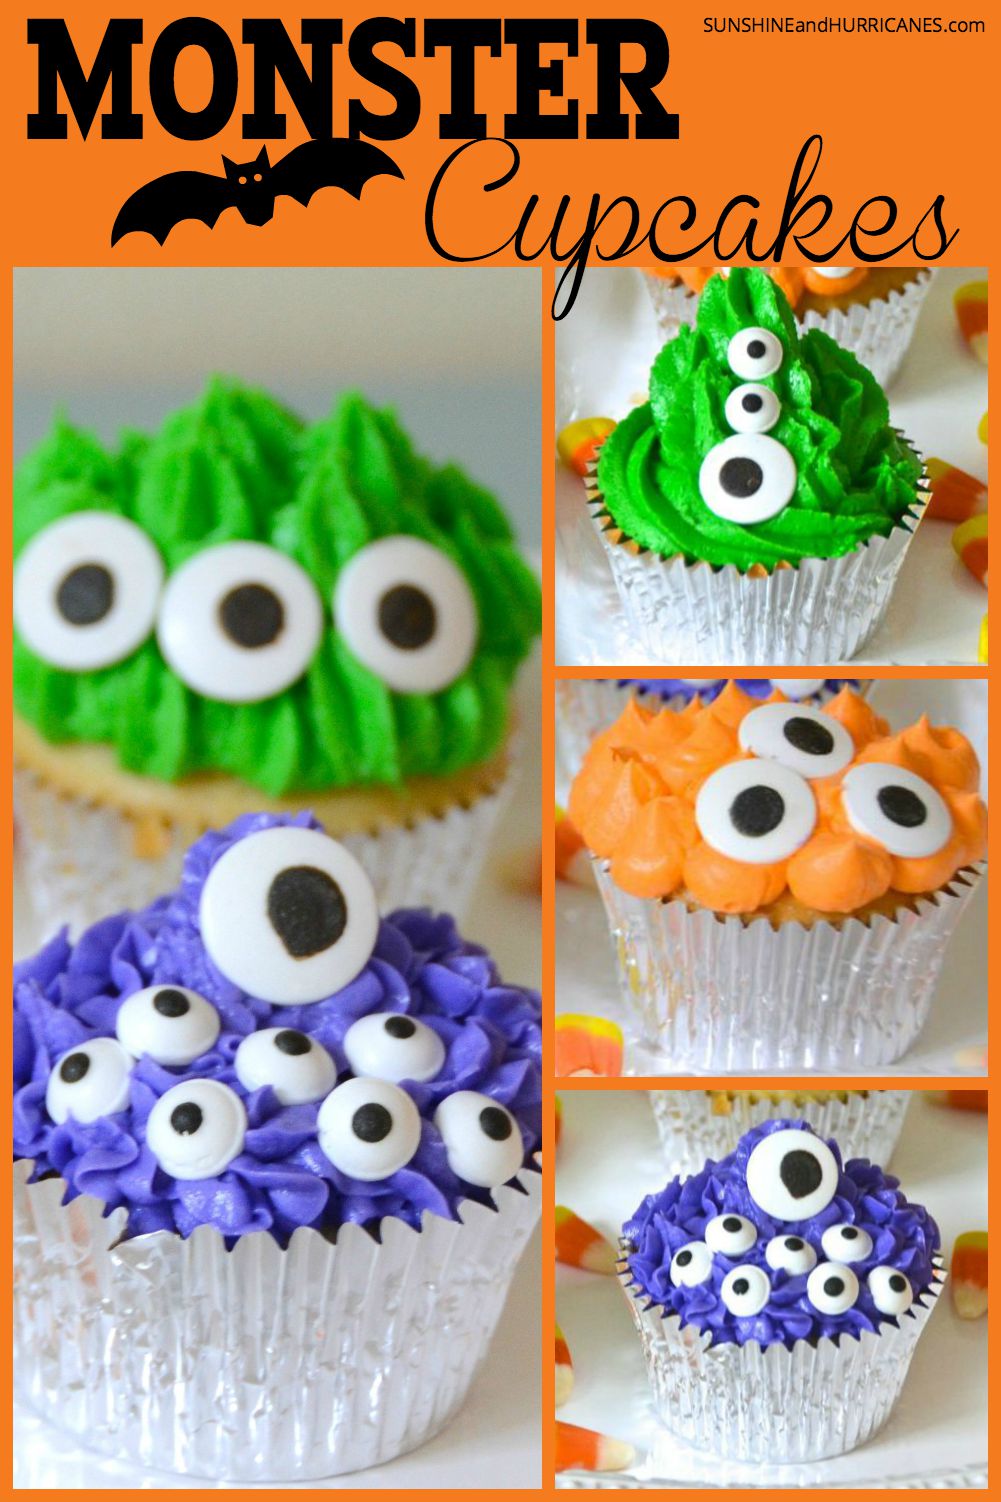 Delightful Monster Cupcakes for a Halloween Birthday